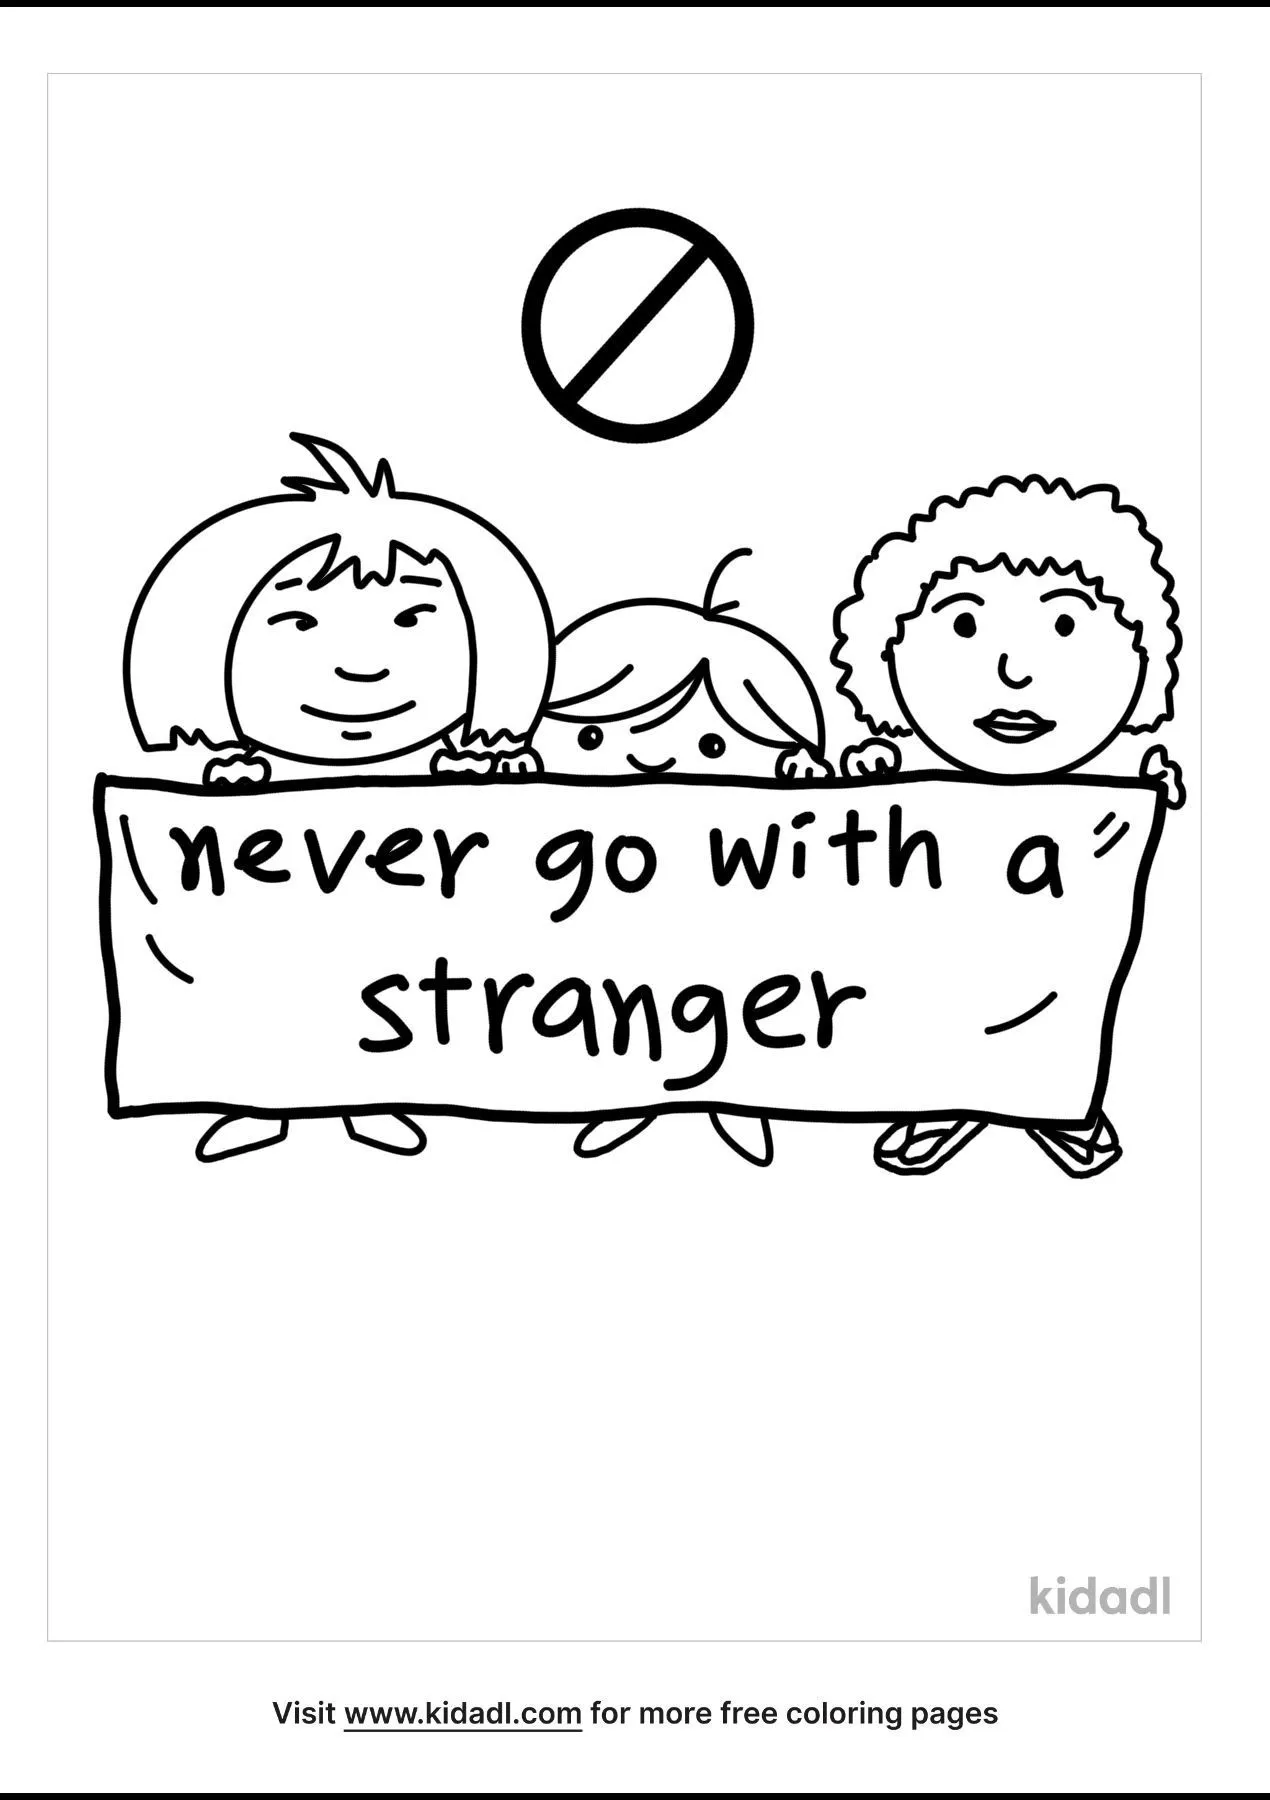 Stranger Danger Coloring Pages Free Emojis Shapes Signs Coloring Pages Kidadl